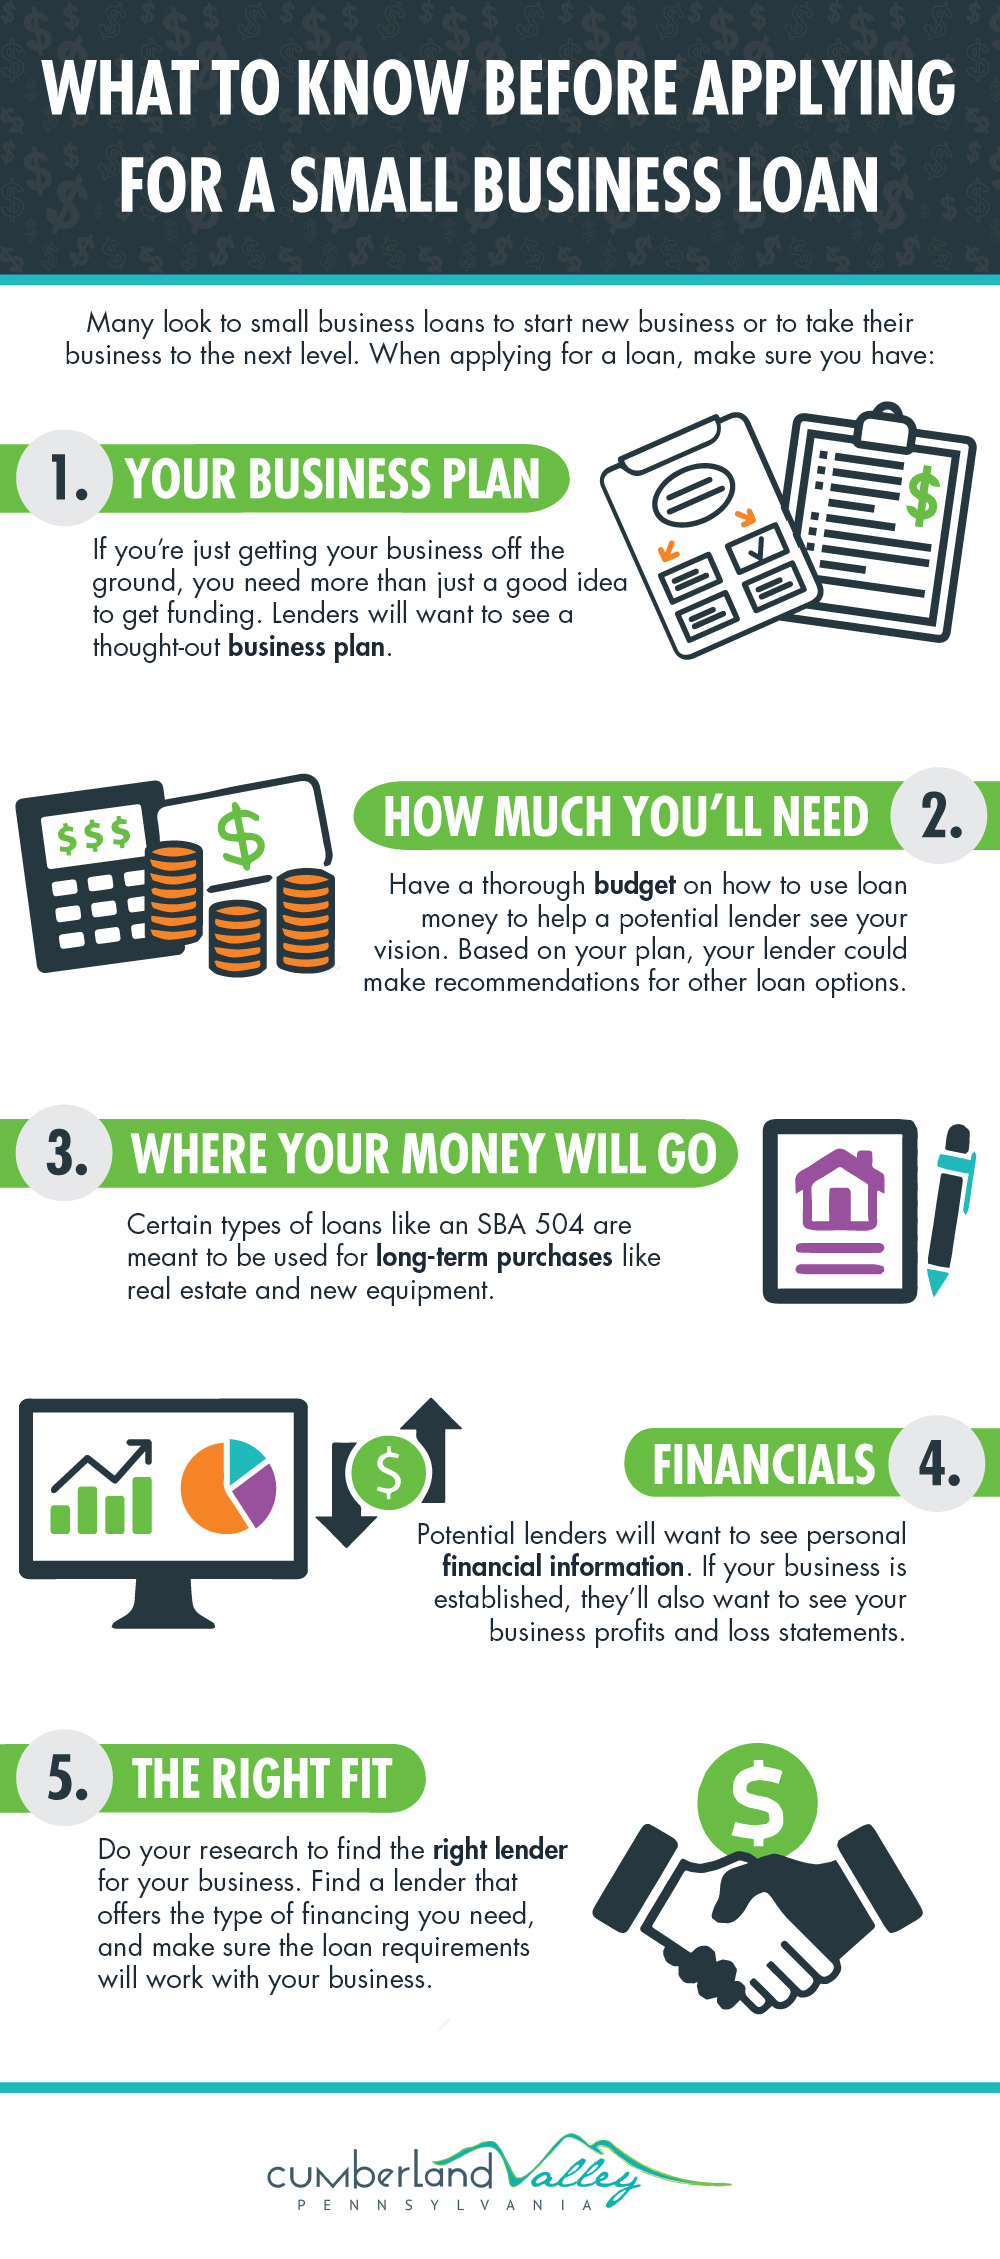 How To Get Financing To Start A Small Business FinanceViewer